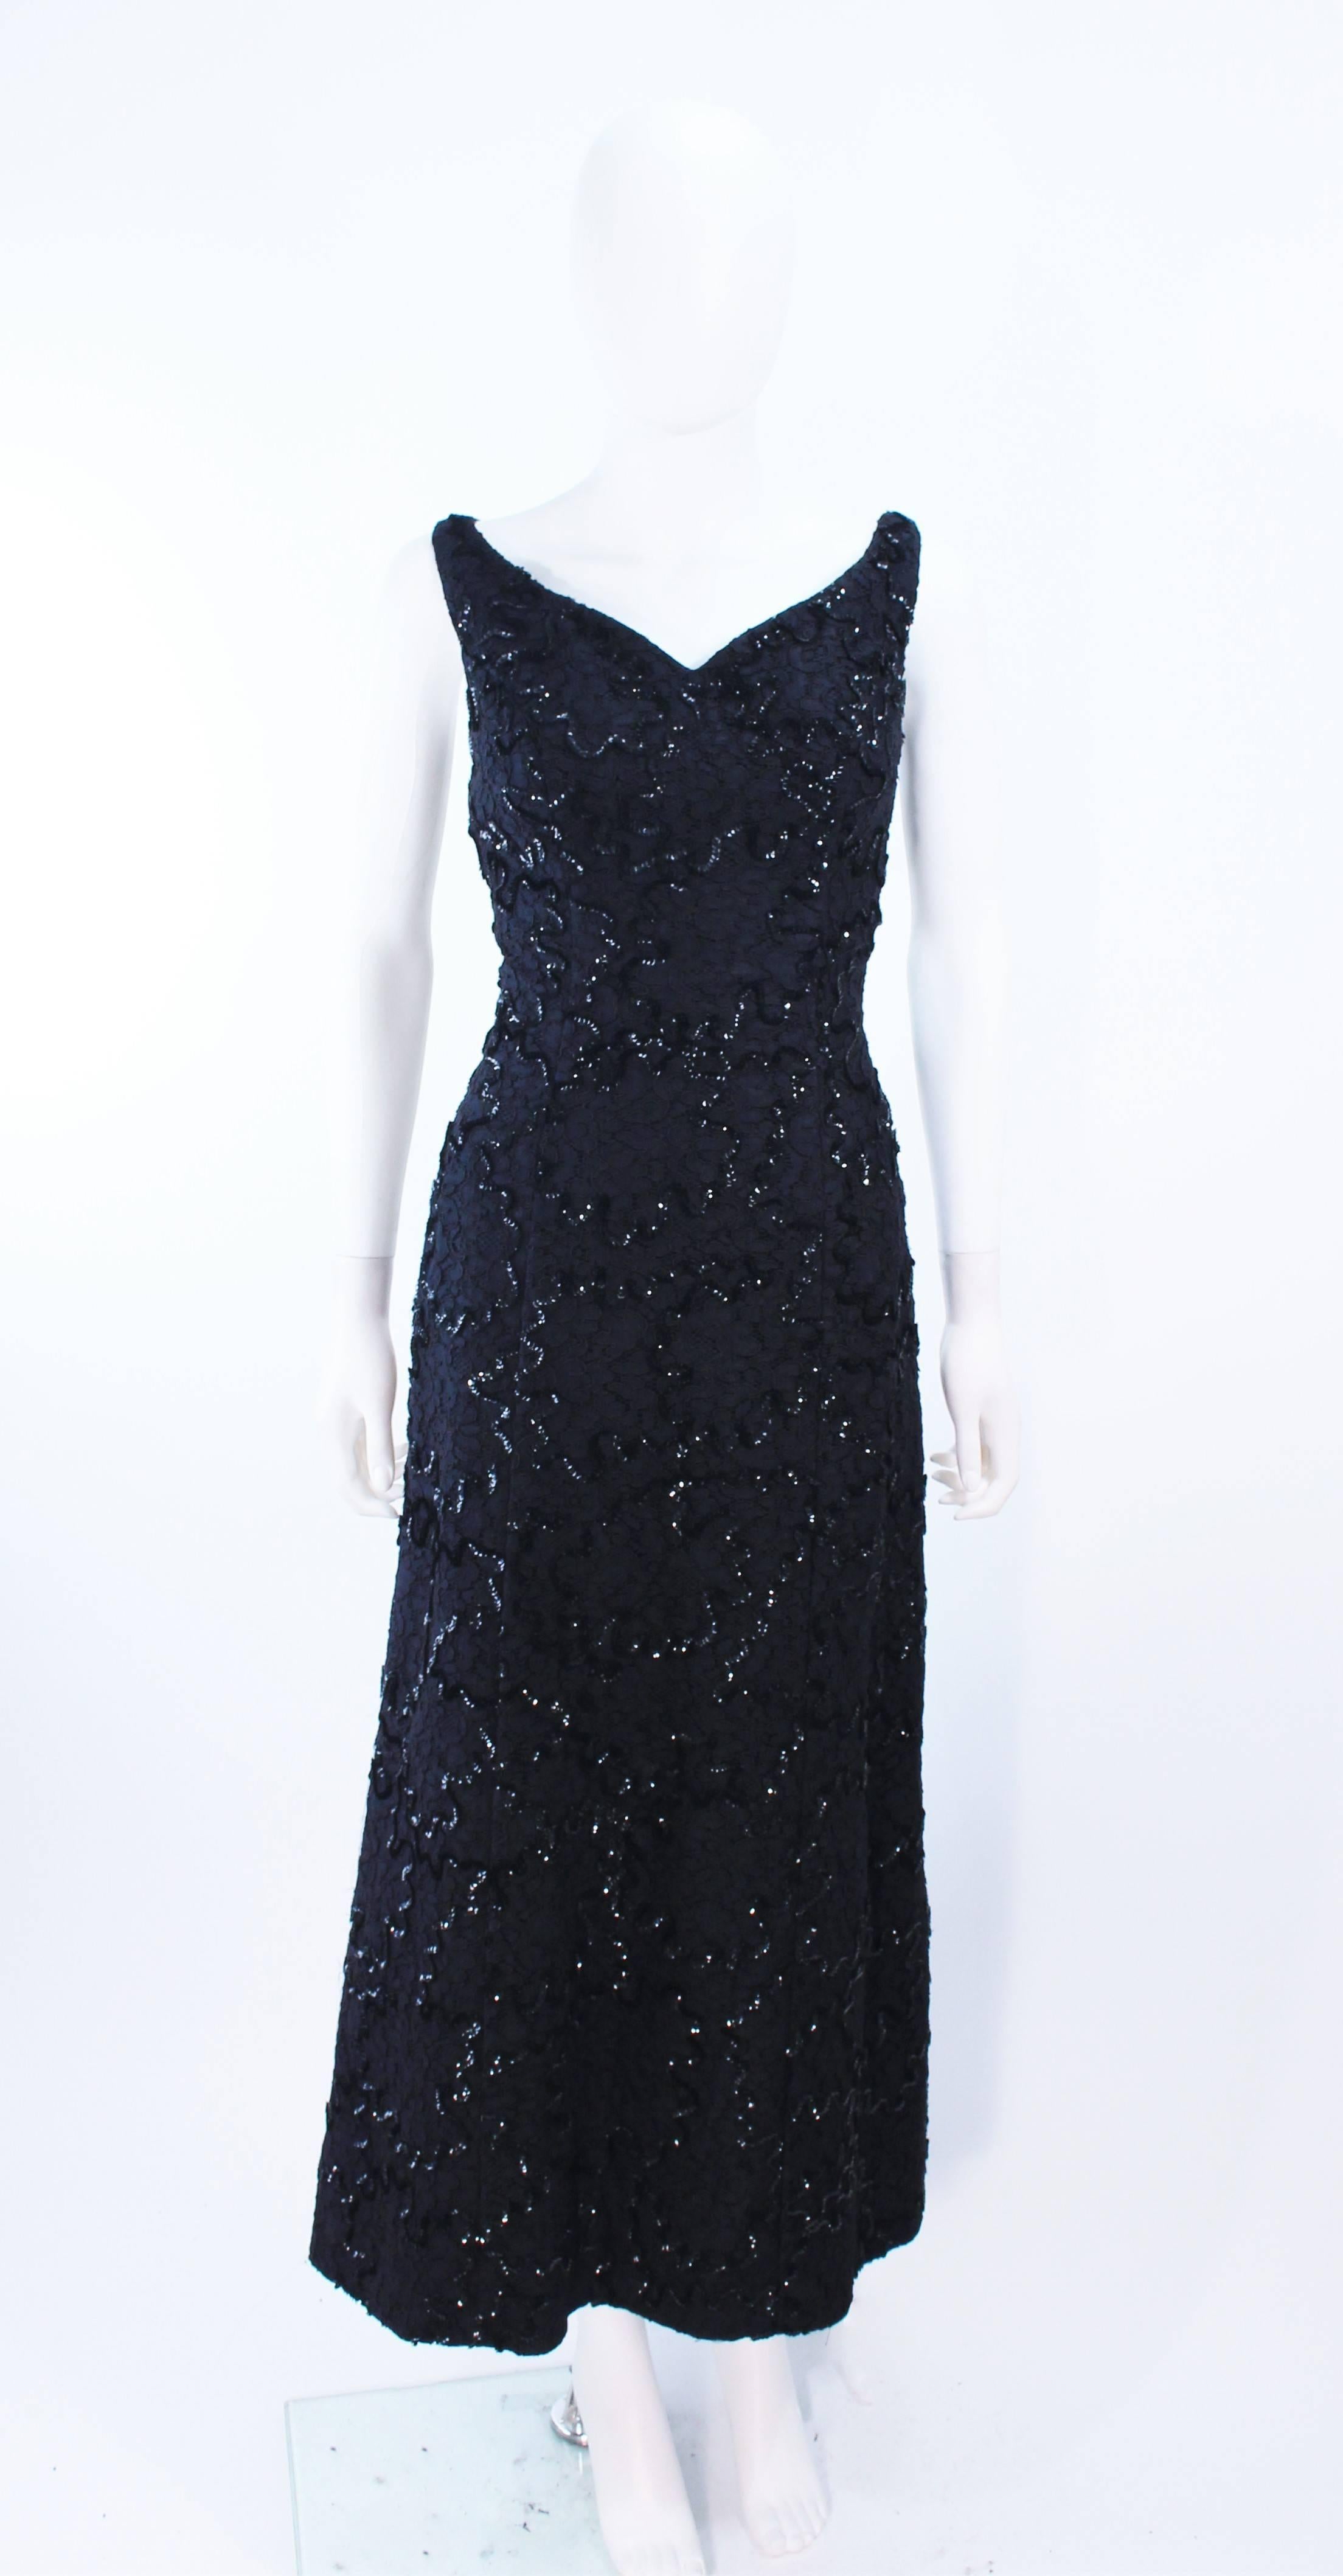 This vintage 1960's gown is composed of a black sequin lace. Features a sweetheart neckline. There is a center back zipper closure. In great vintage condition, there is some discoloration under the arms.

**Please cross-reference measurements for